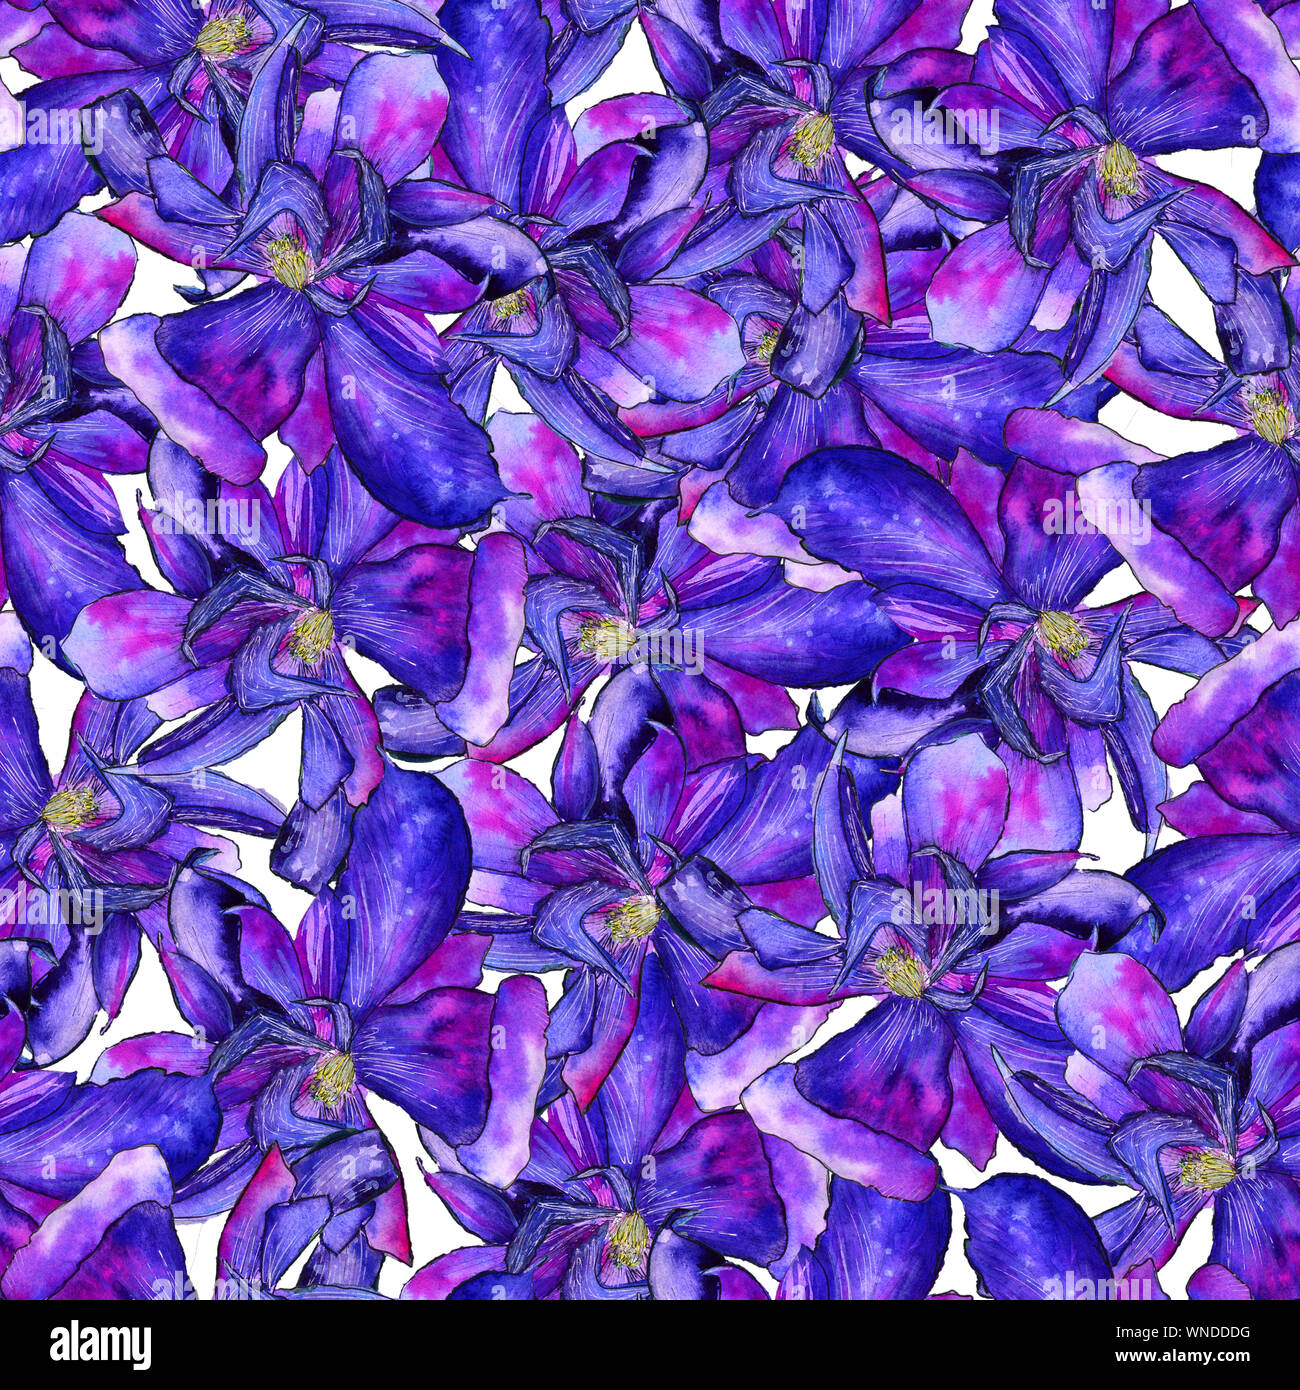 Clematis bright blue flower Seamless Pattern Stock Photo